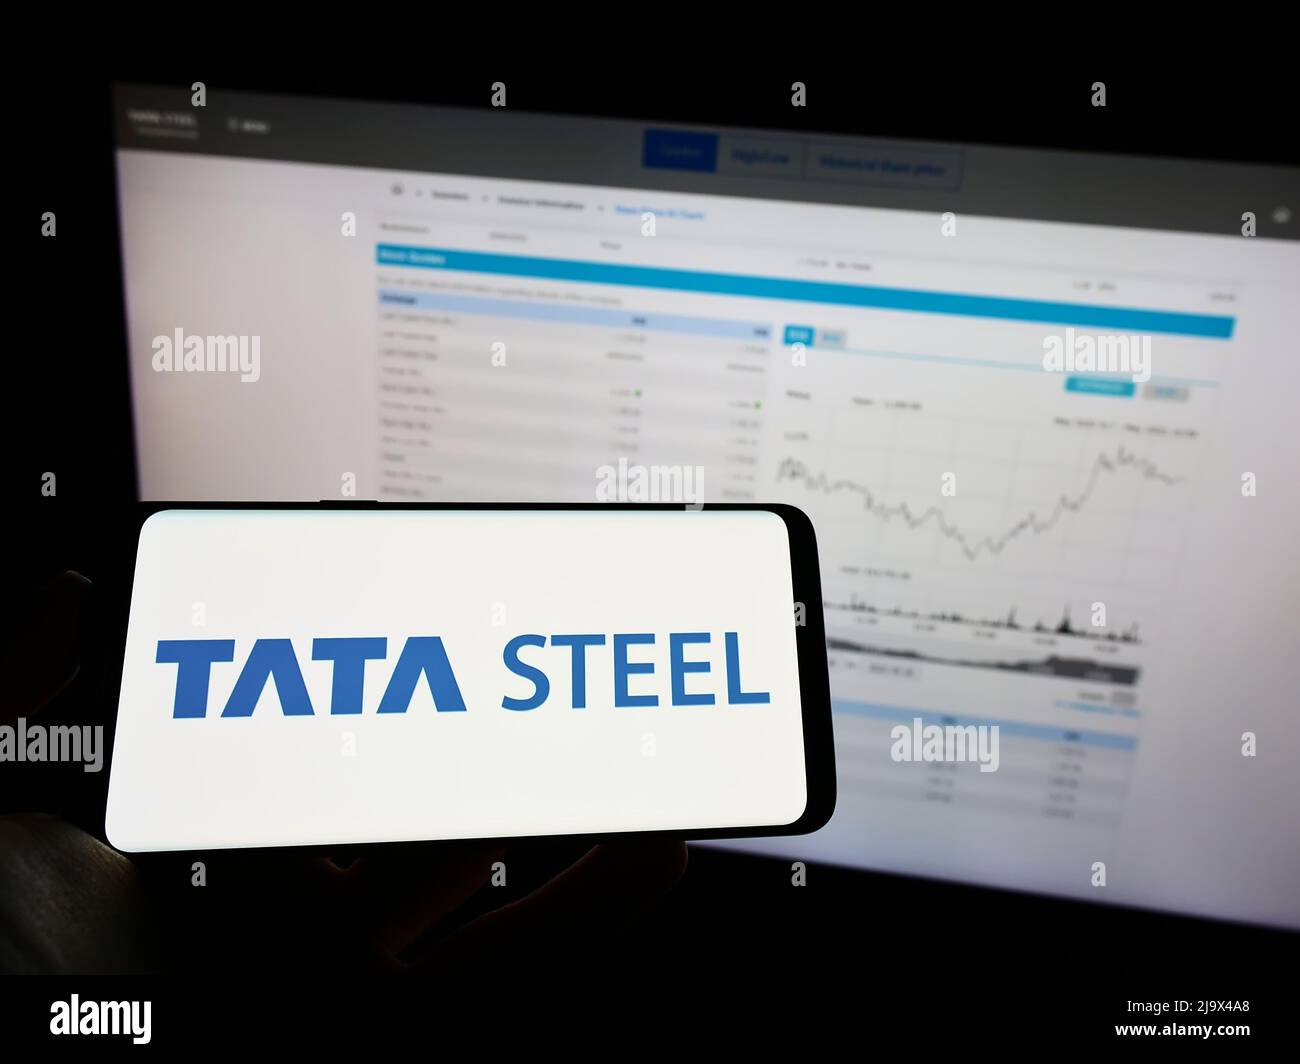 Person holding mobile phone with logo of Indian steelmaking company Tata Steel Limited on screen in front of web page. Focus on phone display. Stock Photo